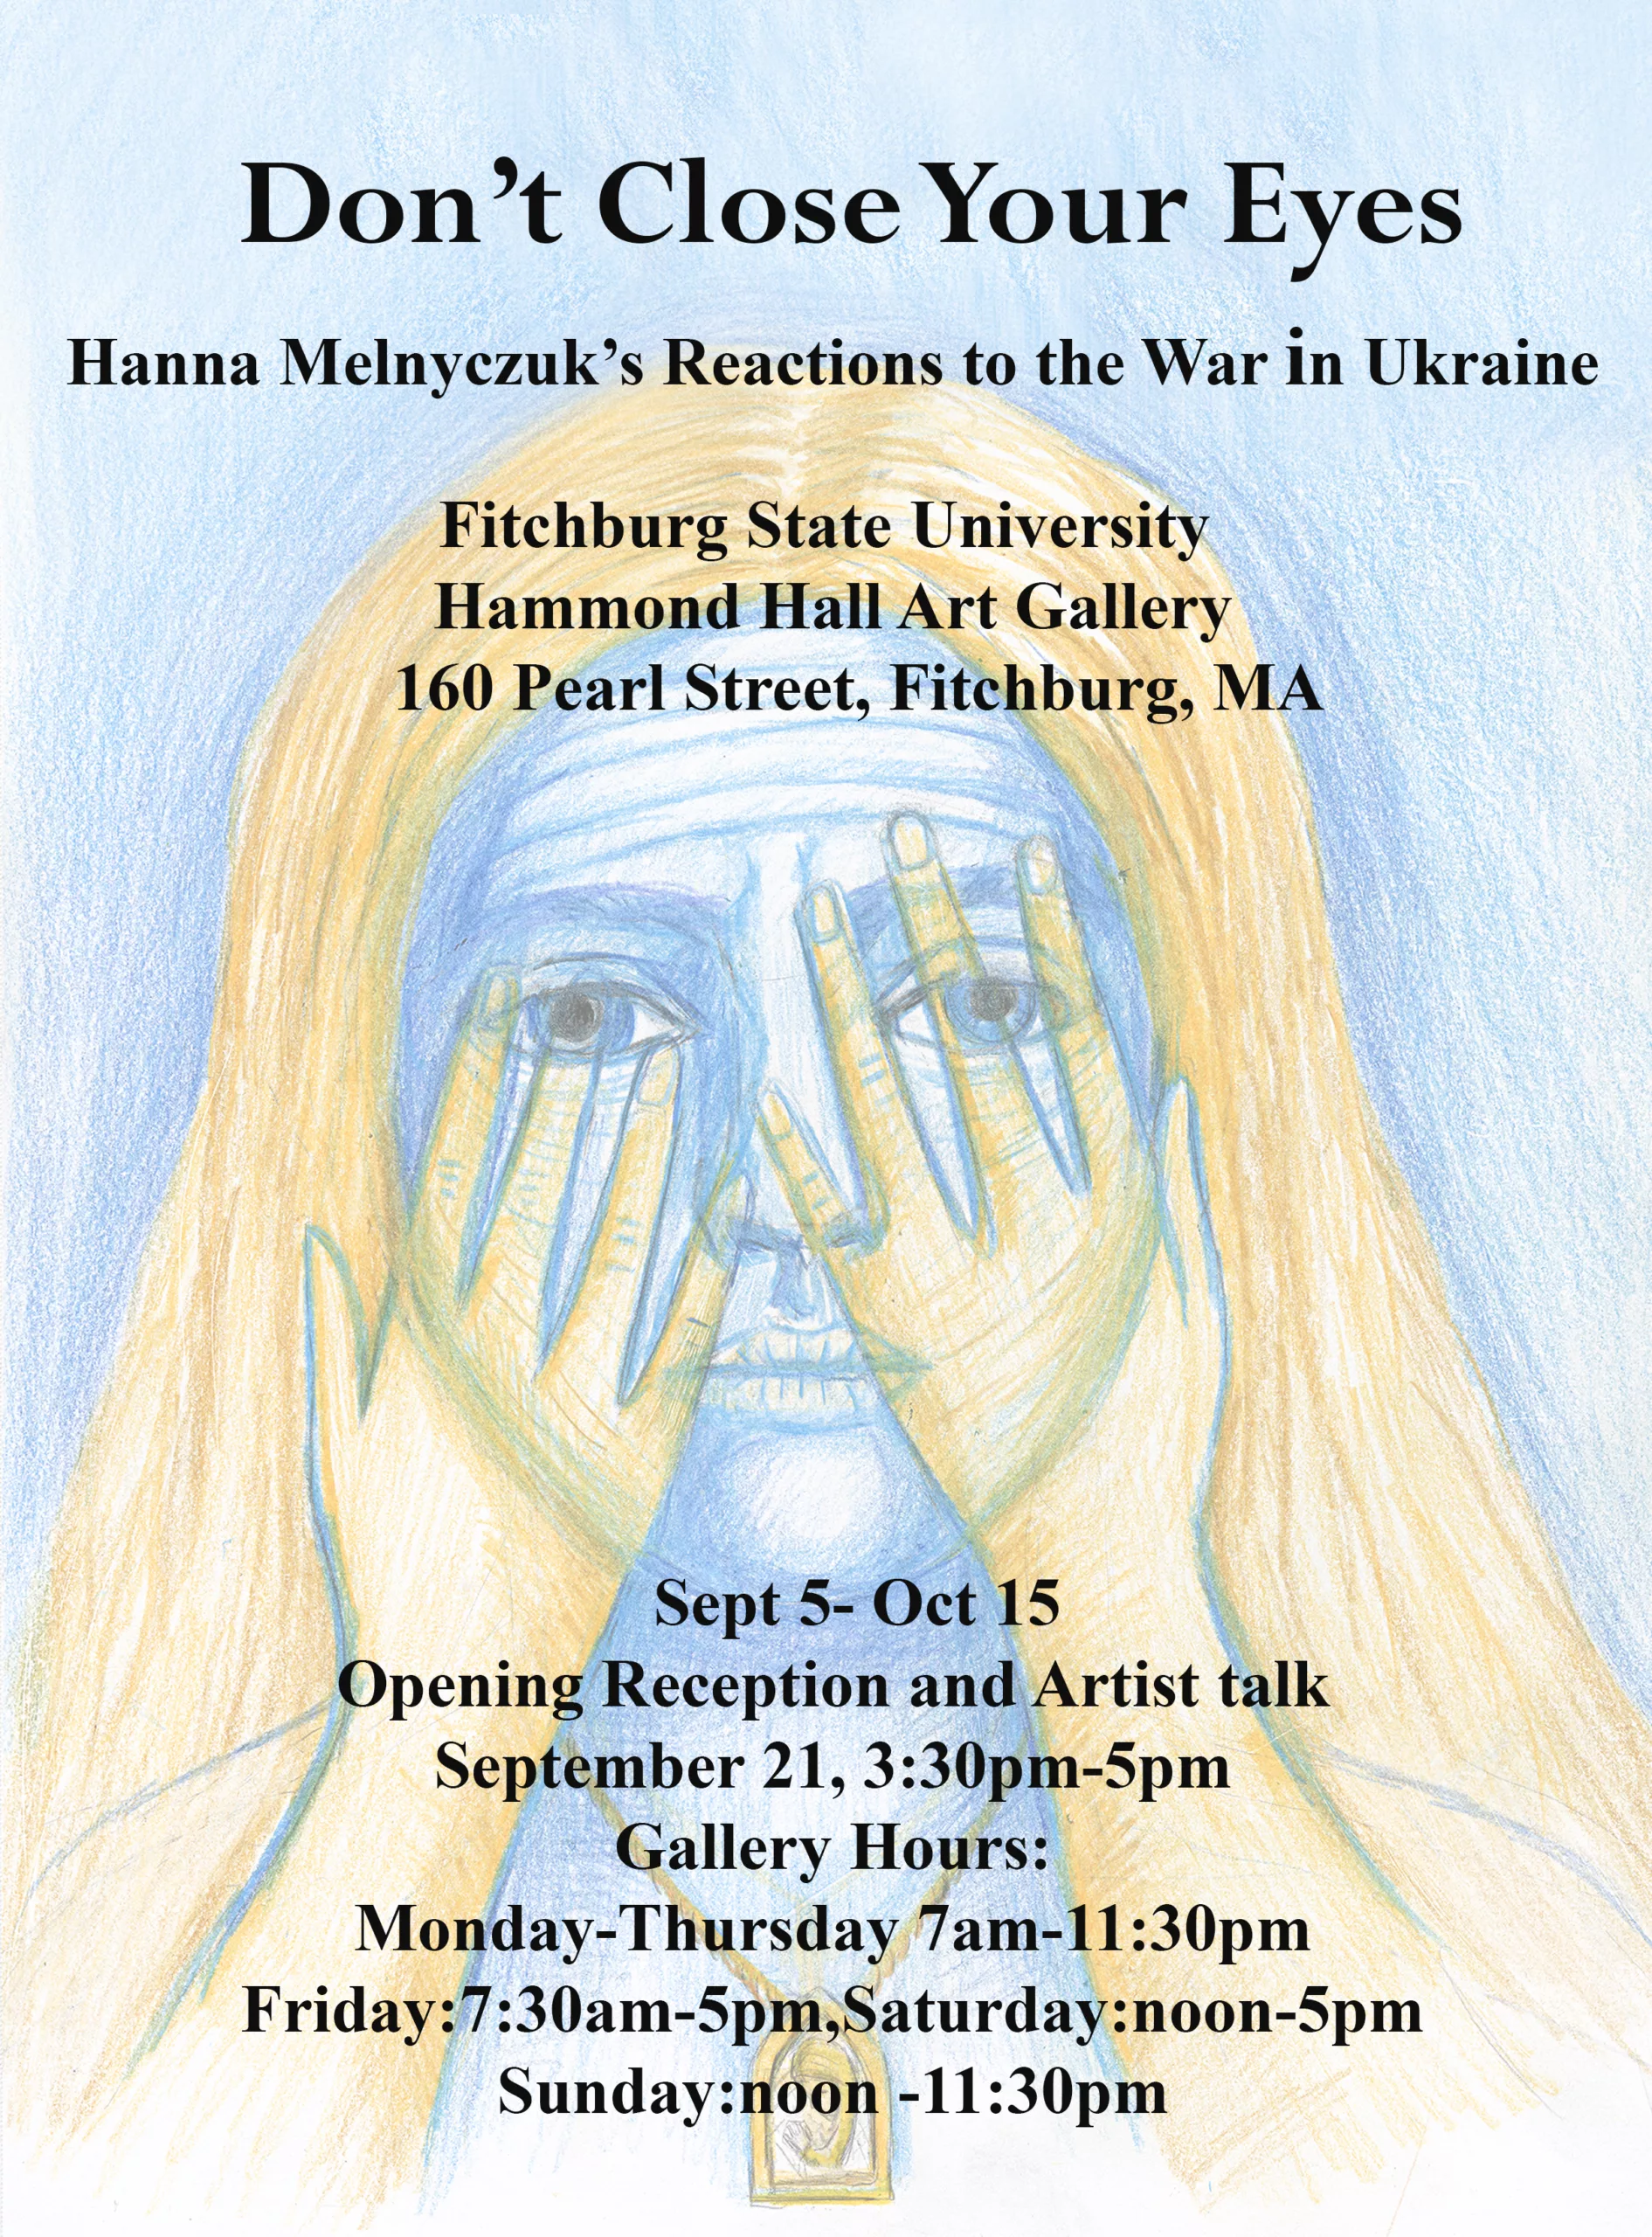 Don't Close Your Eyes: Hanna Melnyczuk's Reactions to the War in Ukraine